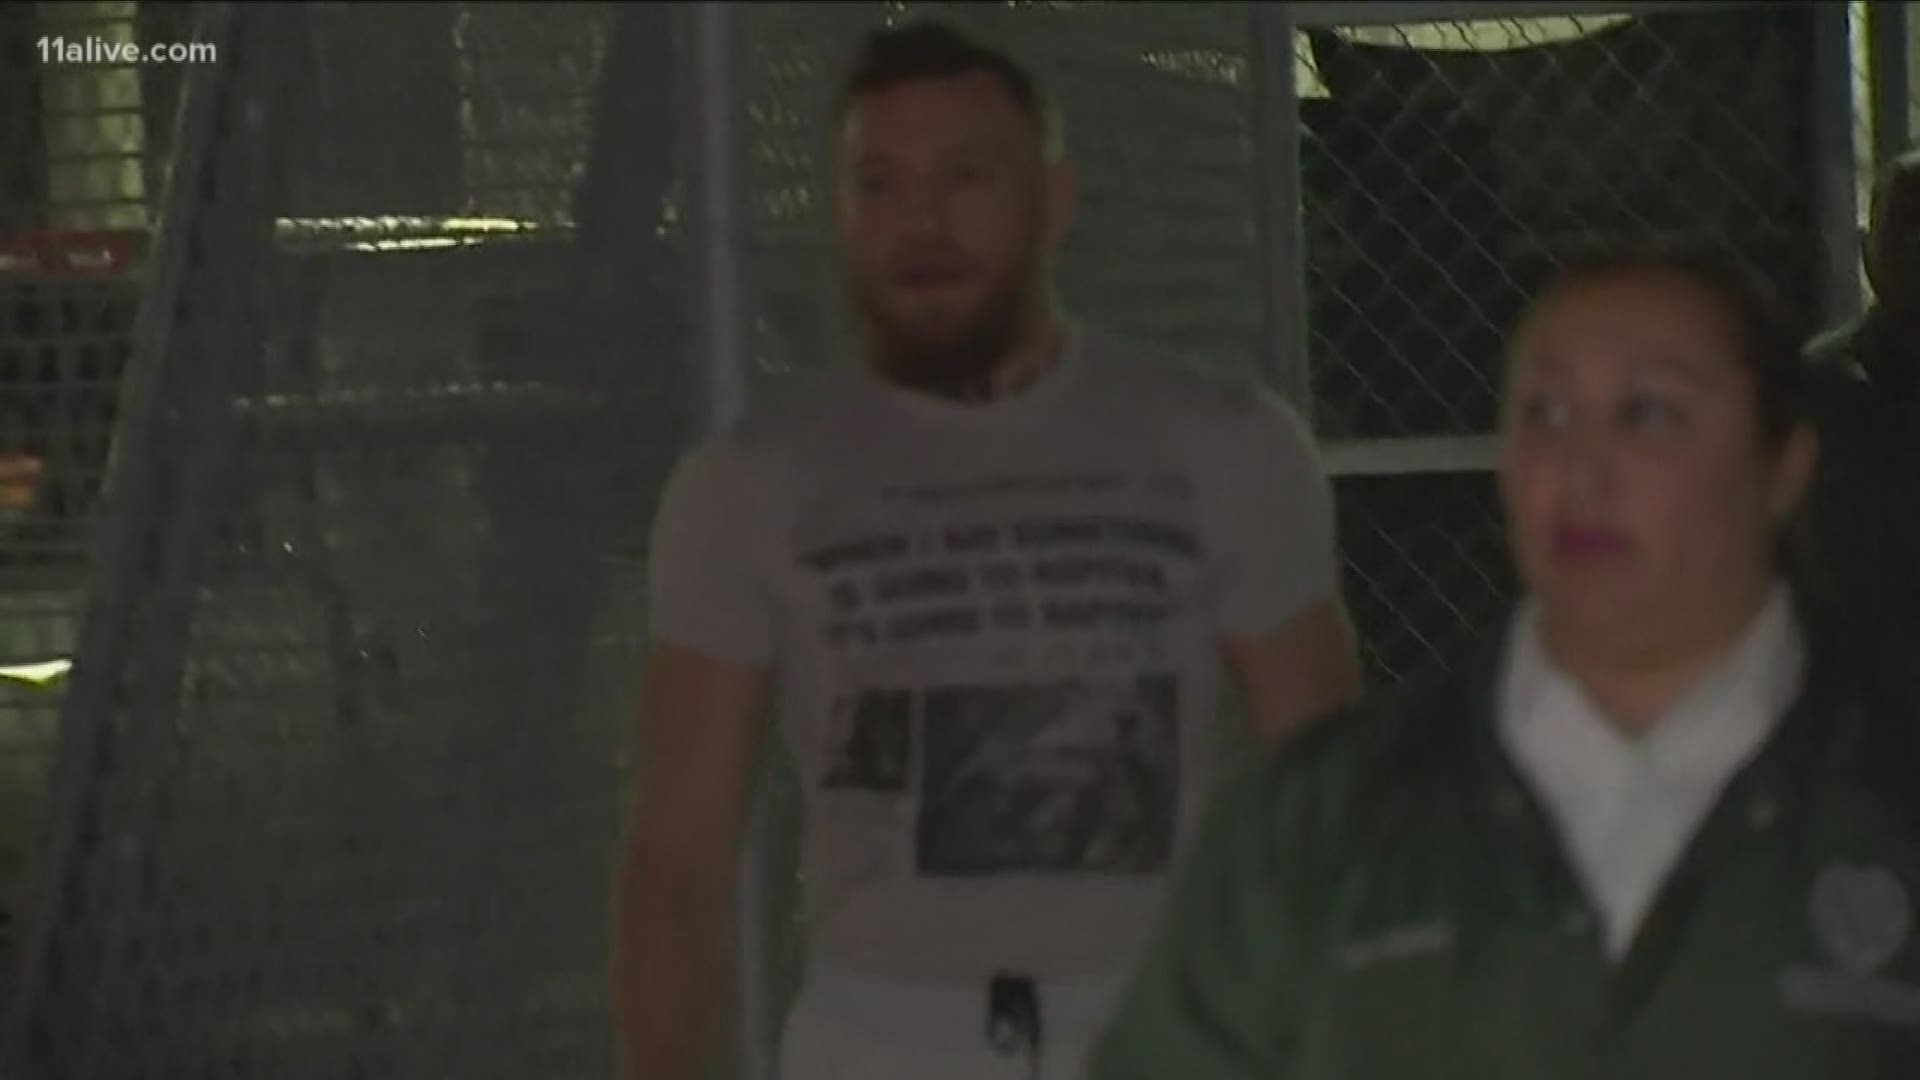 McGregor's run-in with an apparent fan occurred outside a posh Miami hotel early Monday morning.